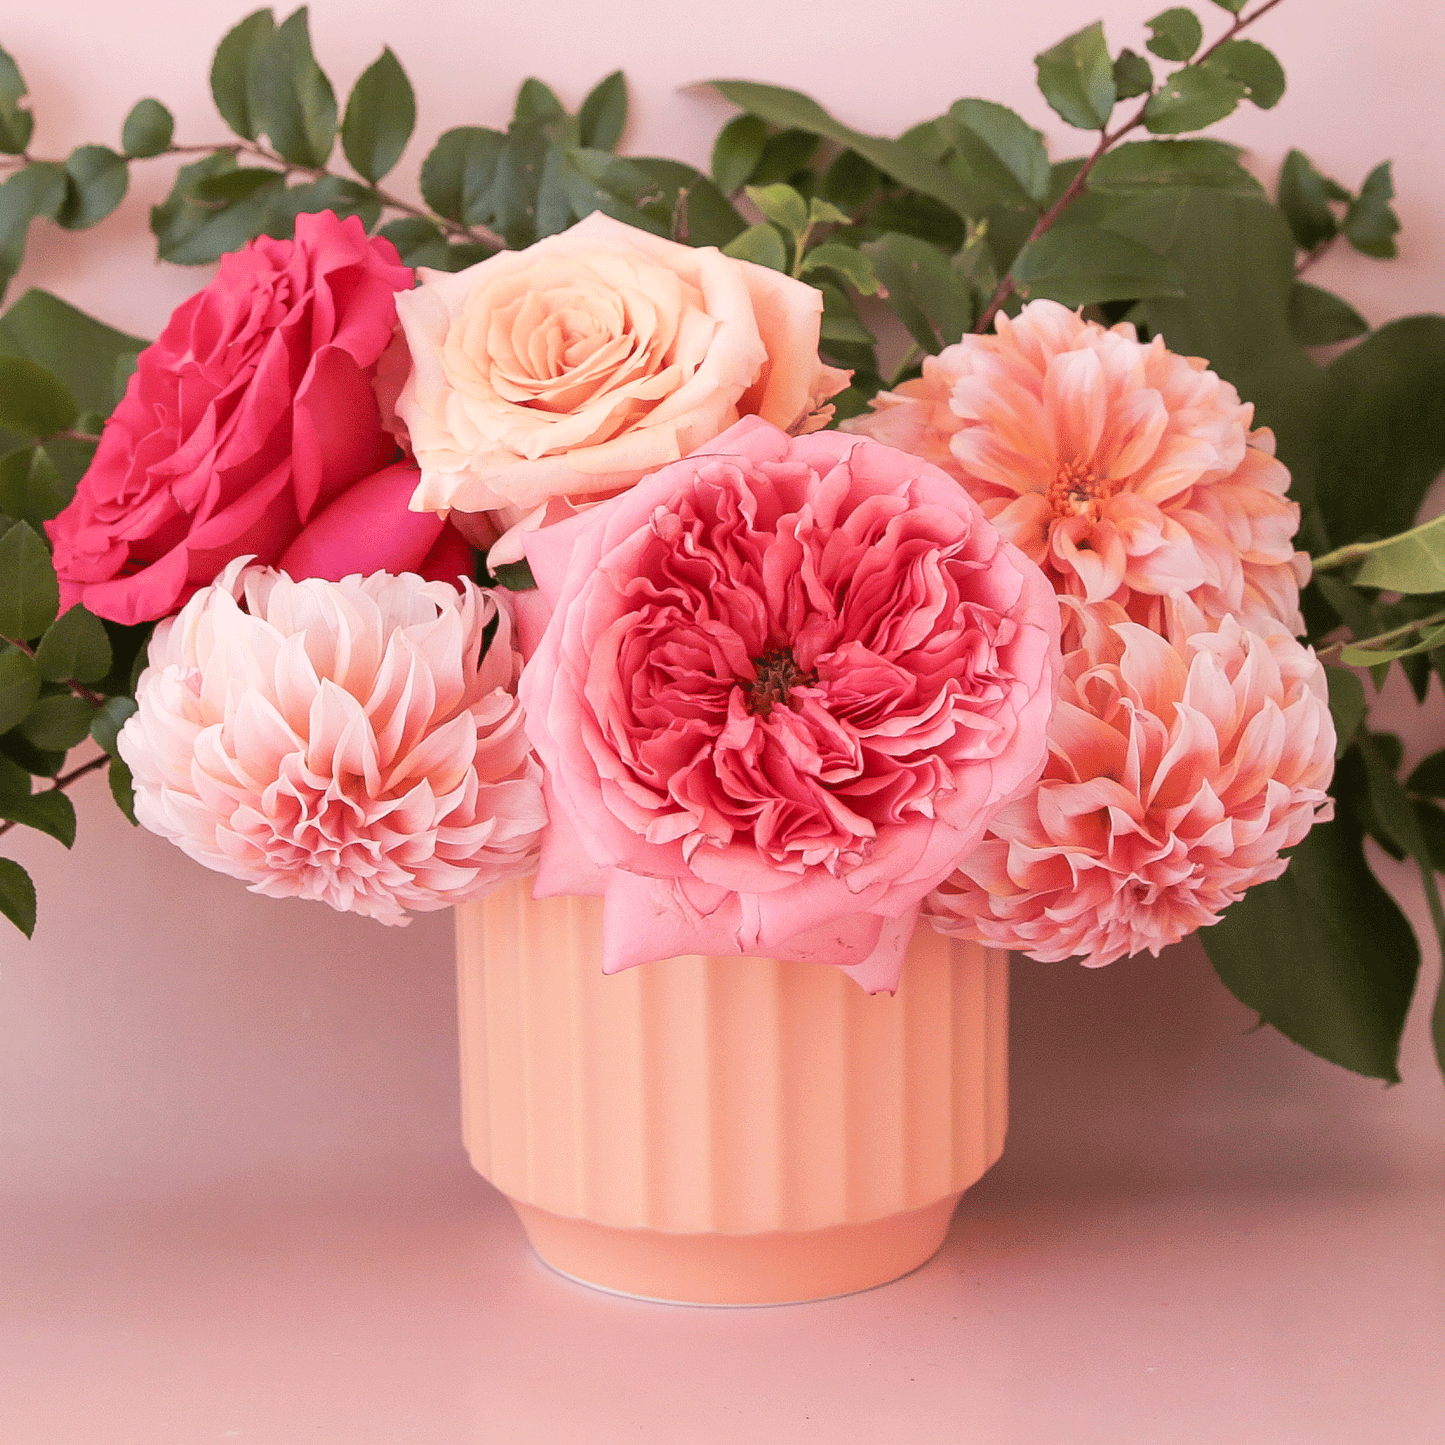 On a pink background is a pink and green flower arrangement inside of a pink fluted ceramic planter.